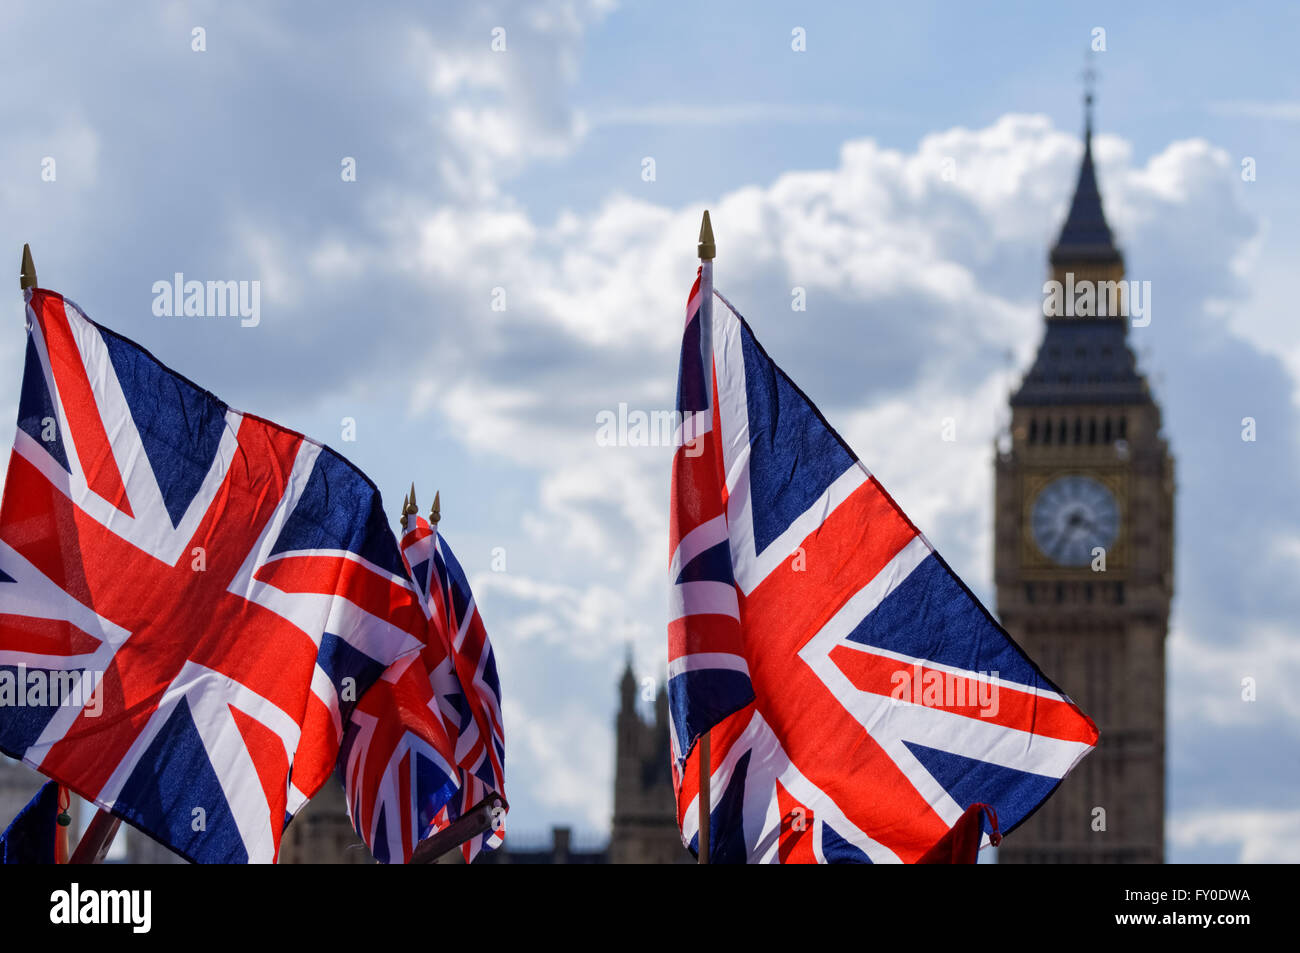 Big Ben at the Palace of Westminster with Union Jack flags, London England United Kingdom UK Stock Photo